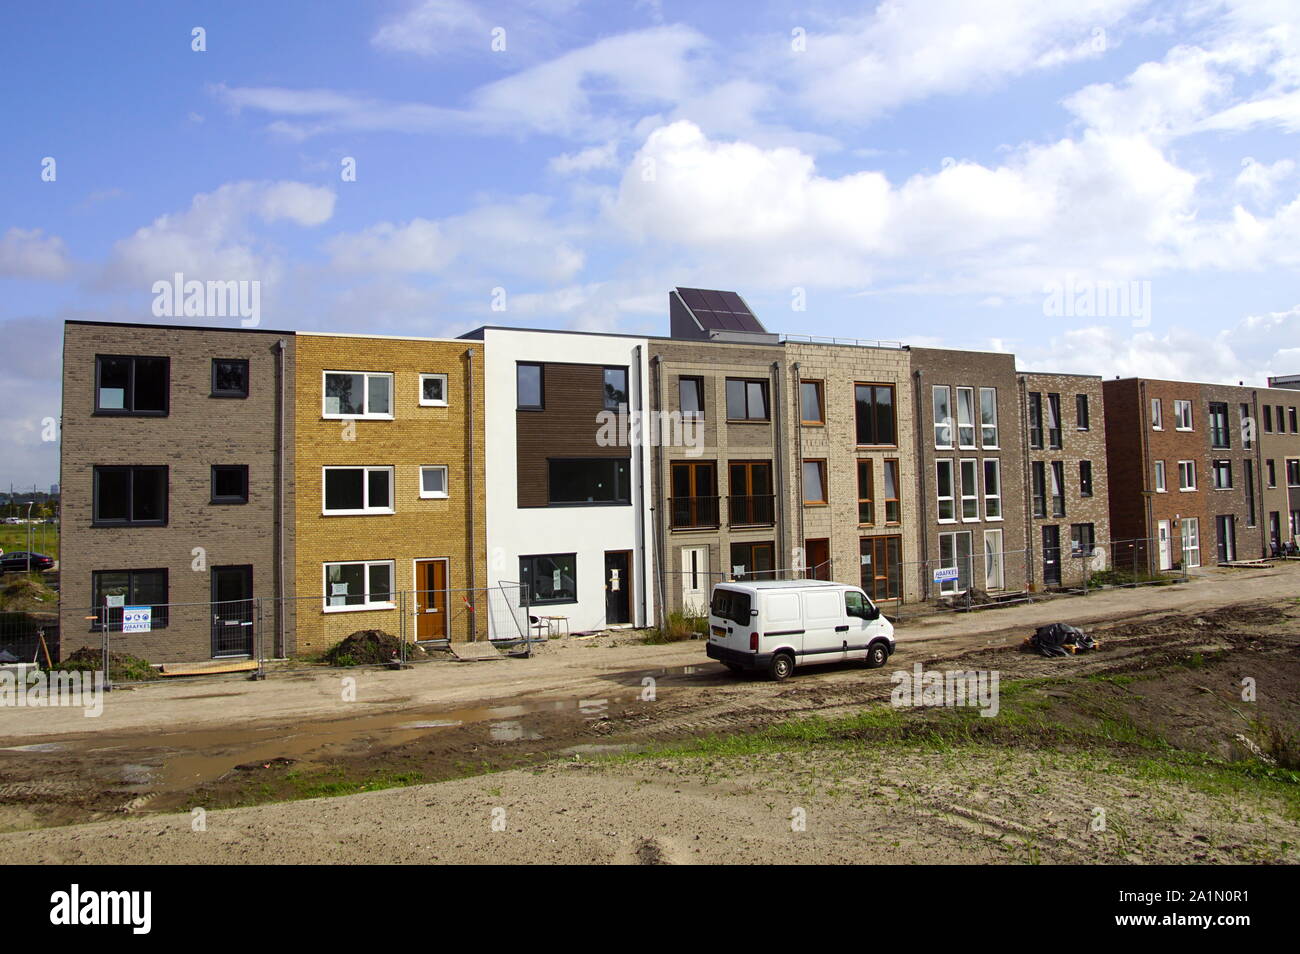 Almere Poort, the Netherland - September 27, 2019: House construction near completion on a housing construction site in the city of Almere. Stock Photo